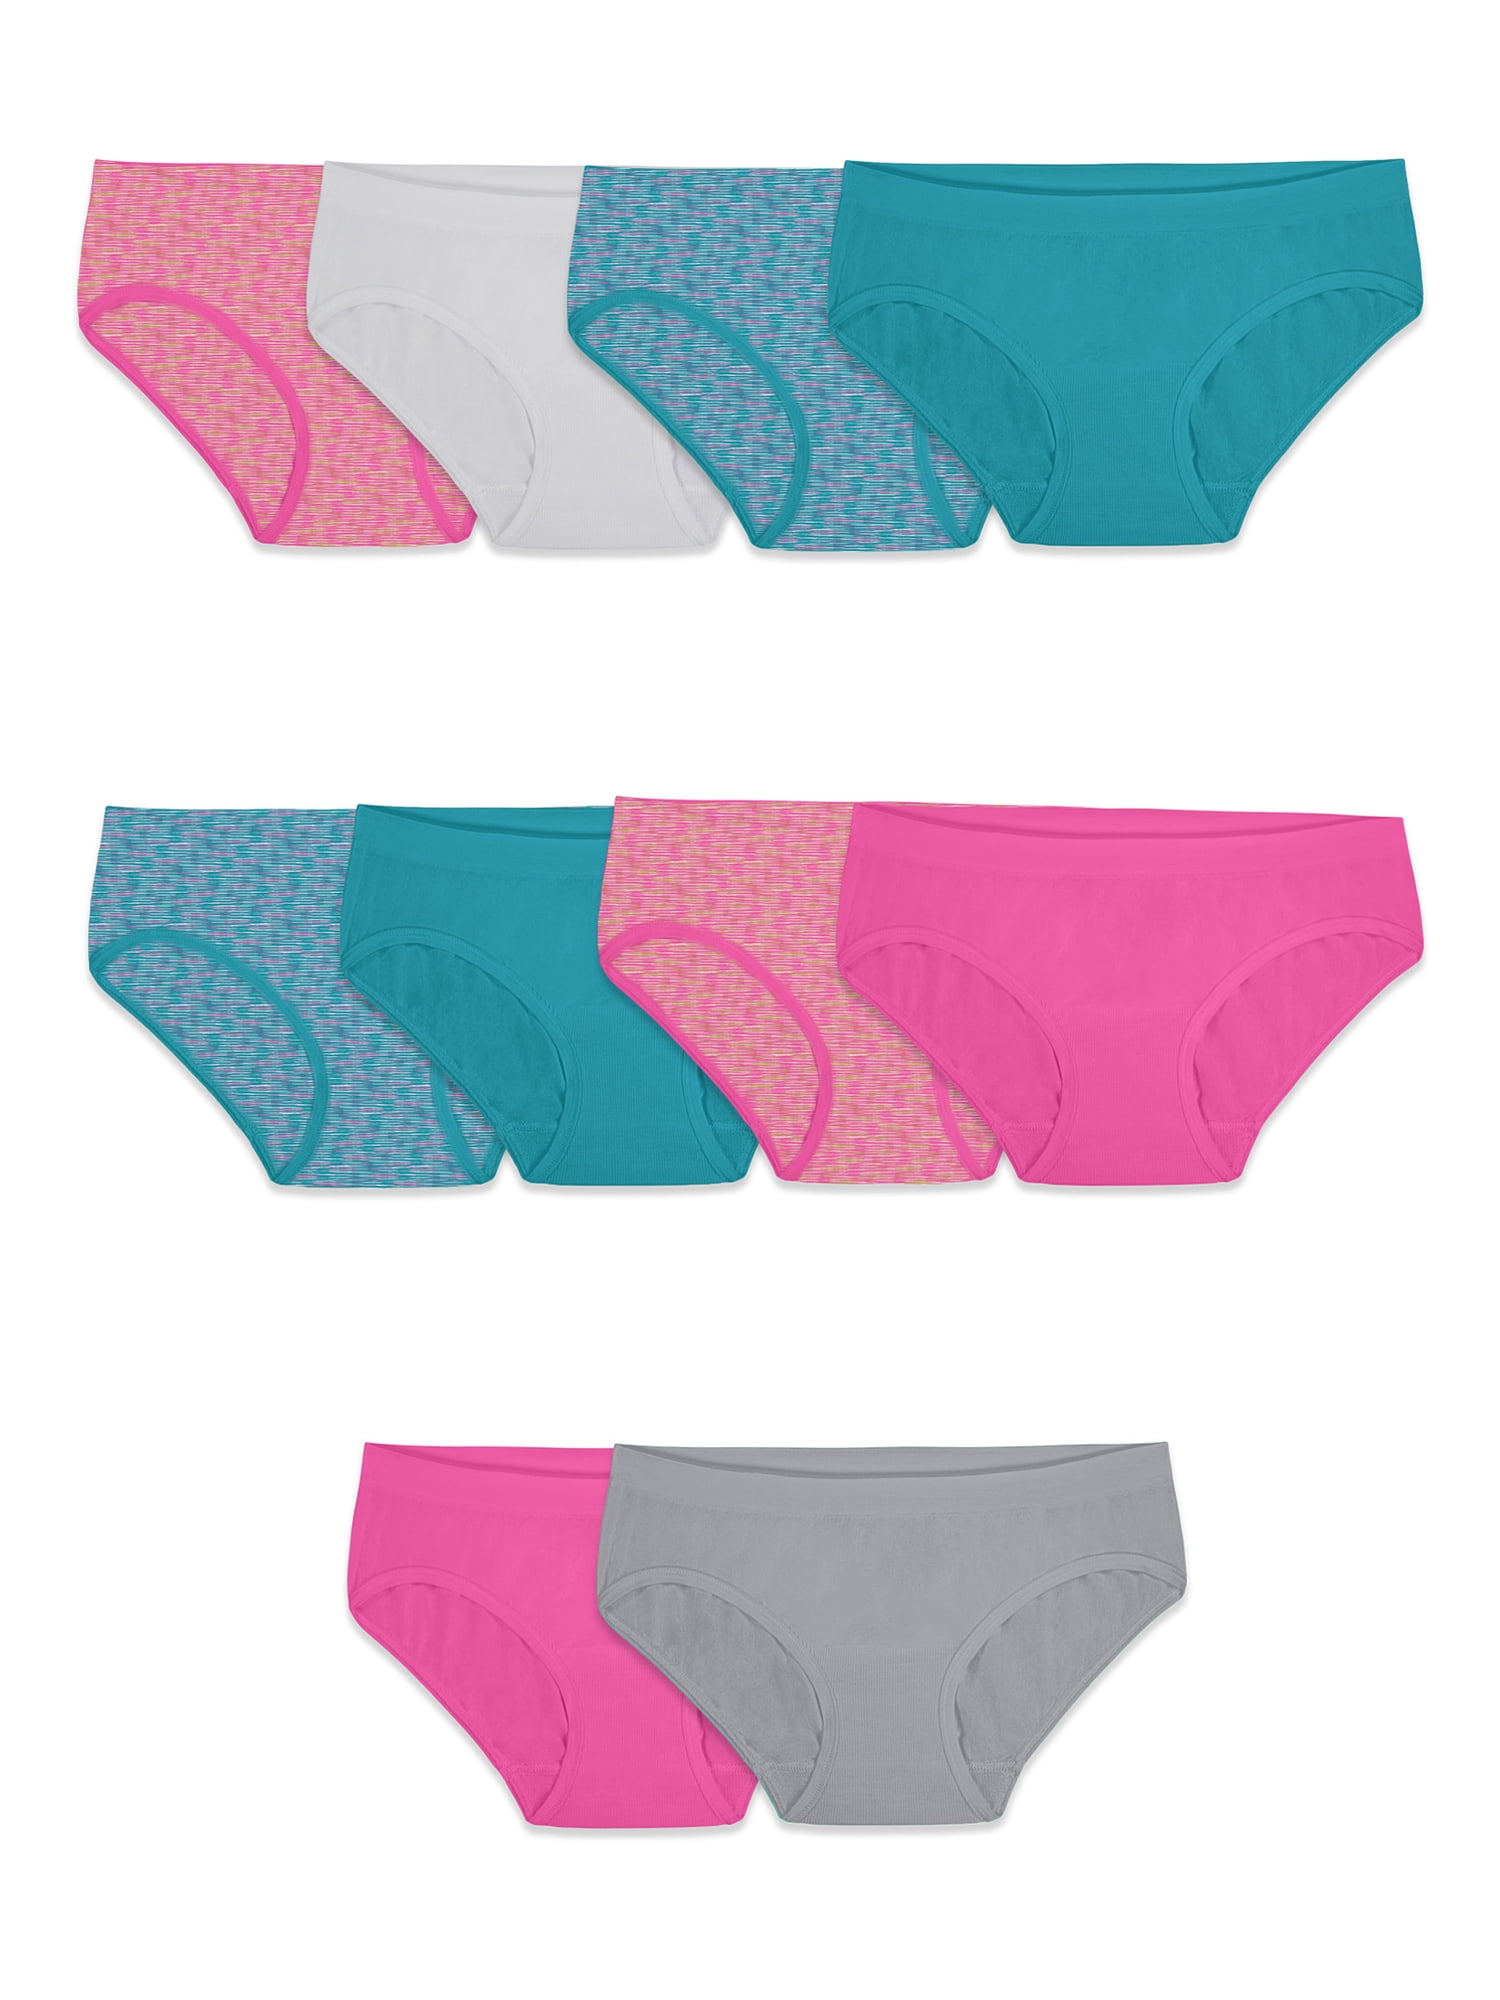 Fruit of the Loom Girls' Seamless Hipster Underwear, 10 Pack